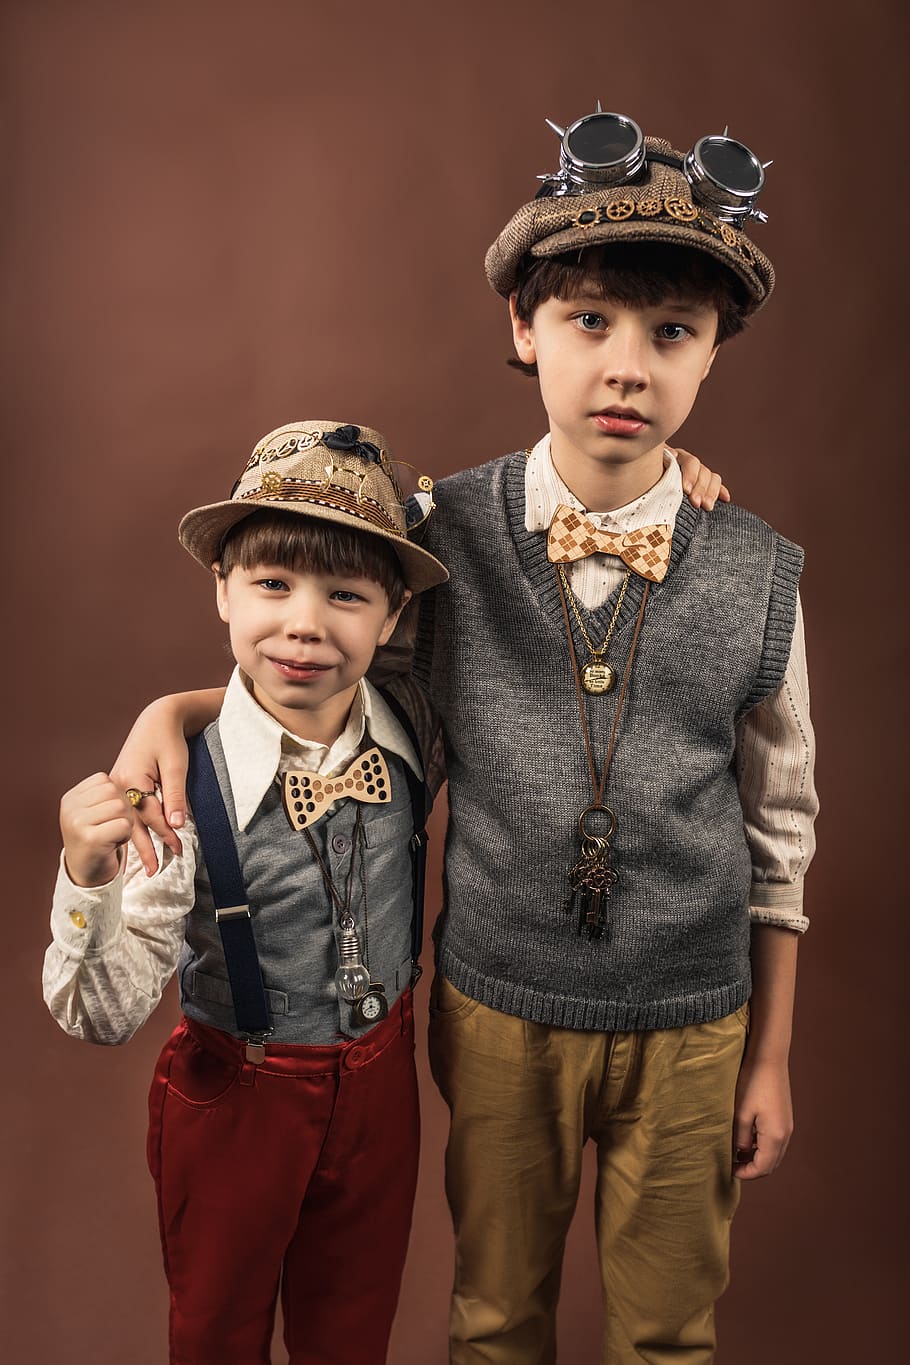 kids, boys, brothers, family, retro, vintage, costumes, rogues, researchers, travelers